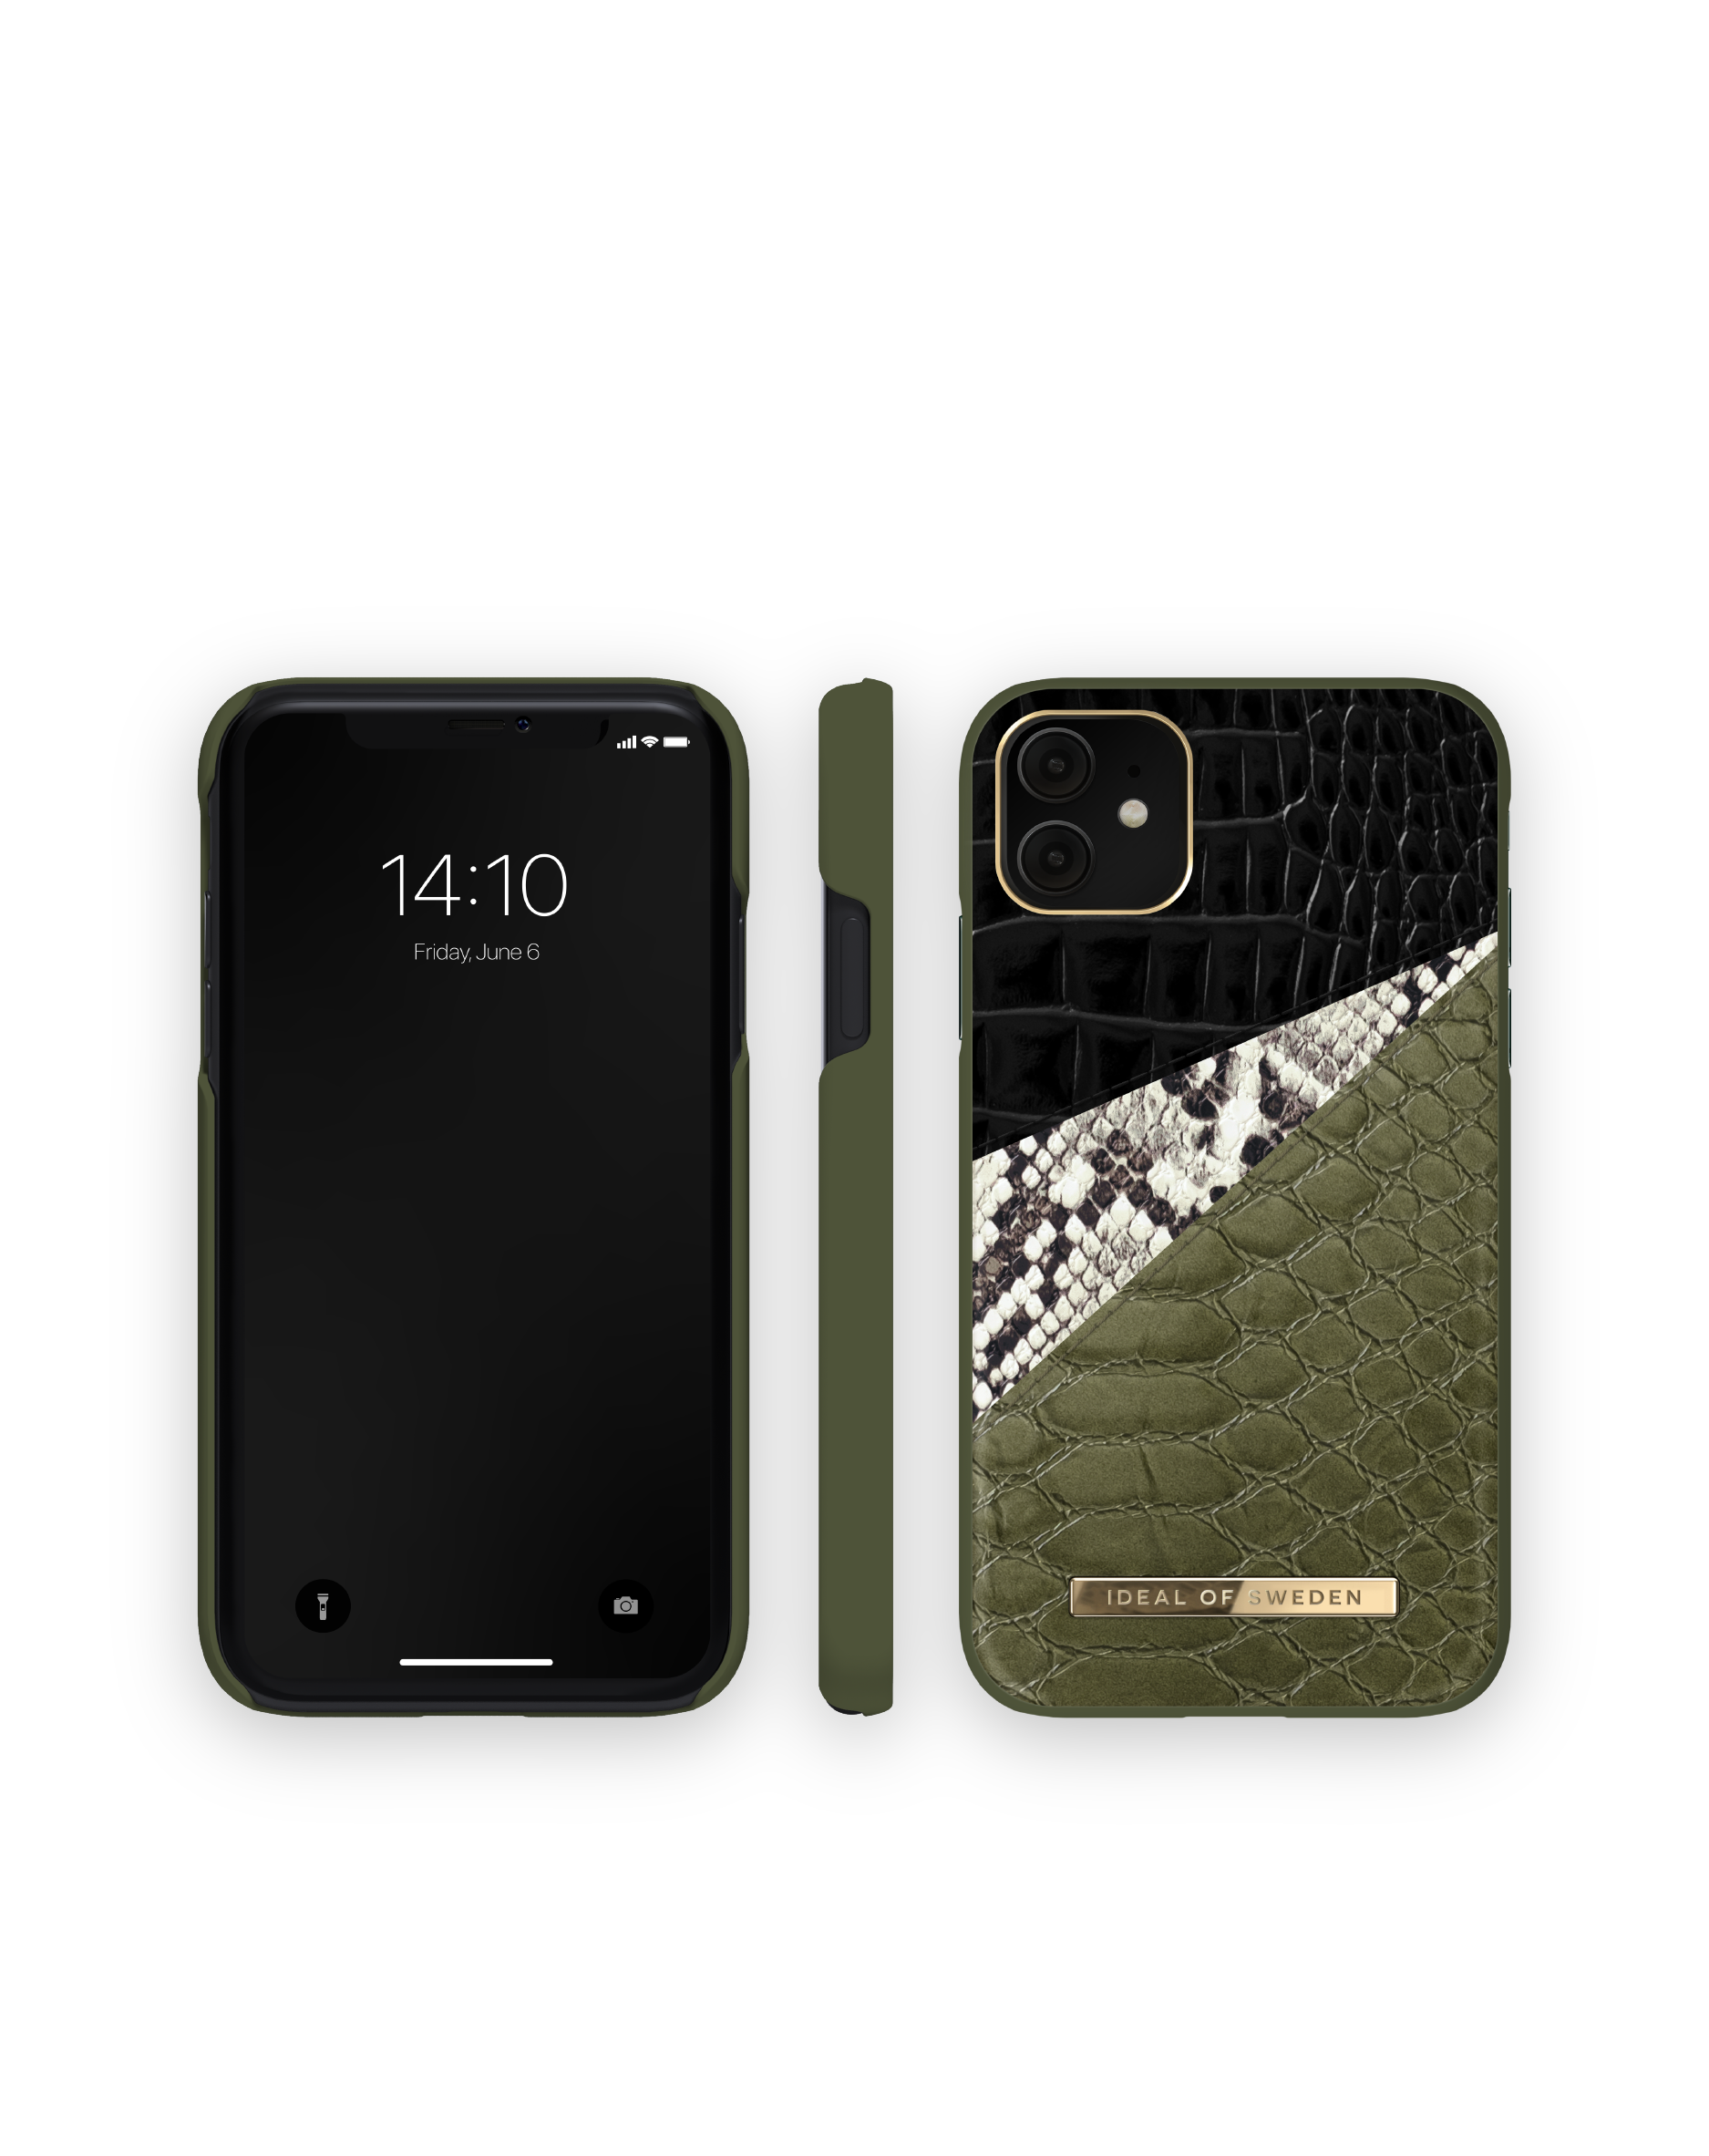 IDEAL OF SWEDEN IDACAW20-1961-224, Backcover, 11, Snake Apple, XR, Hypnotic iPhone iPhone